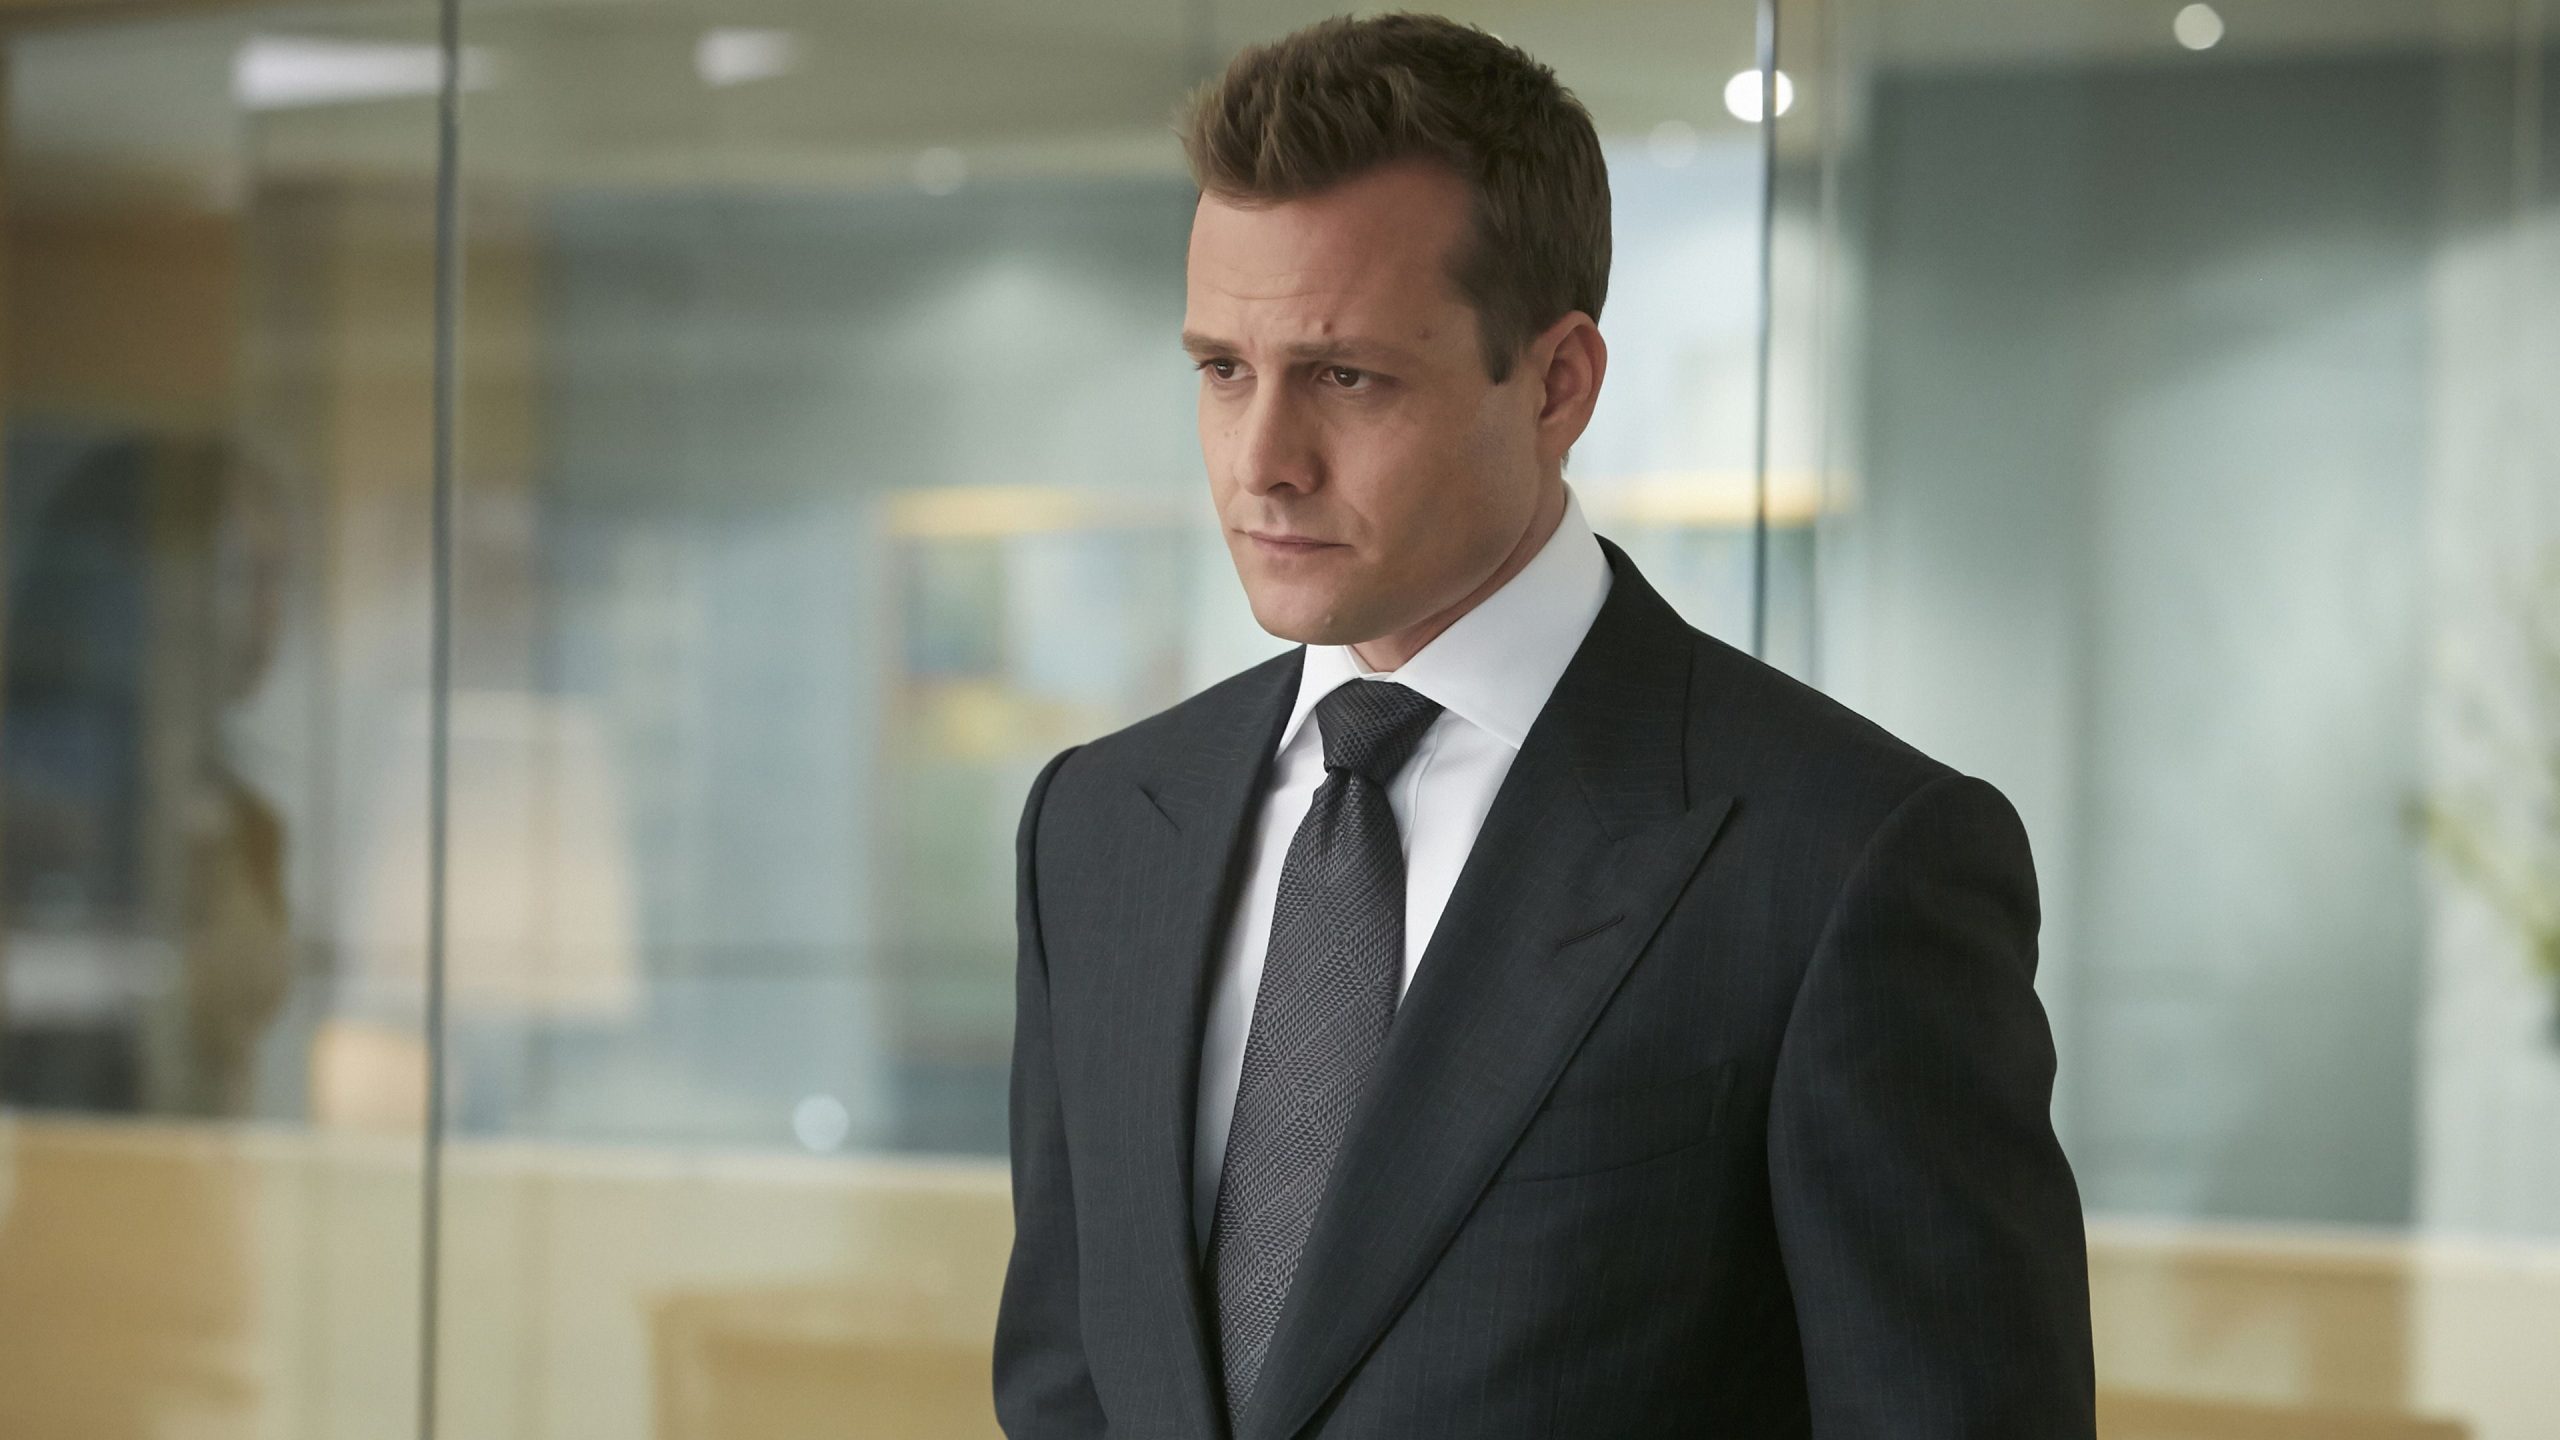 Harvey Specter's approach to dressing